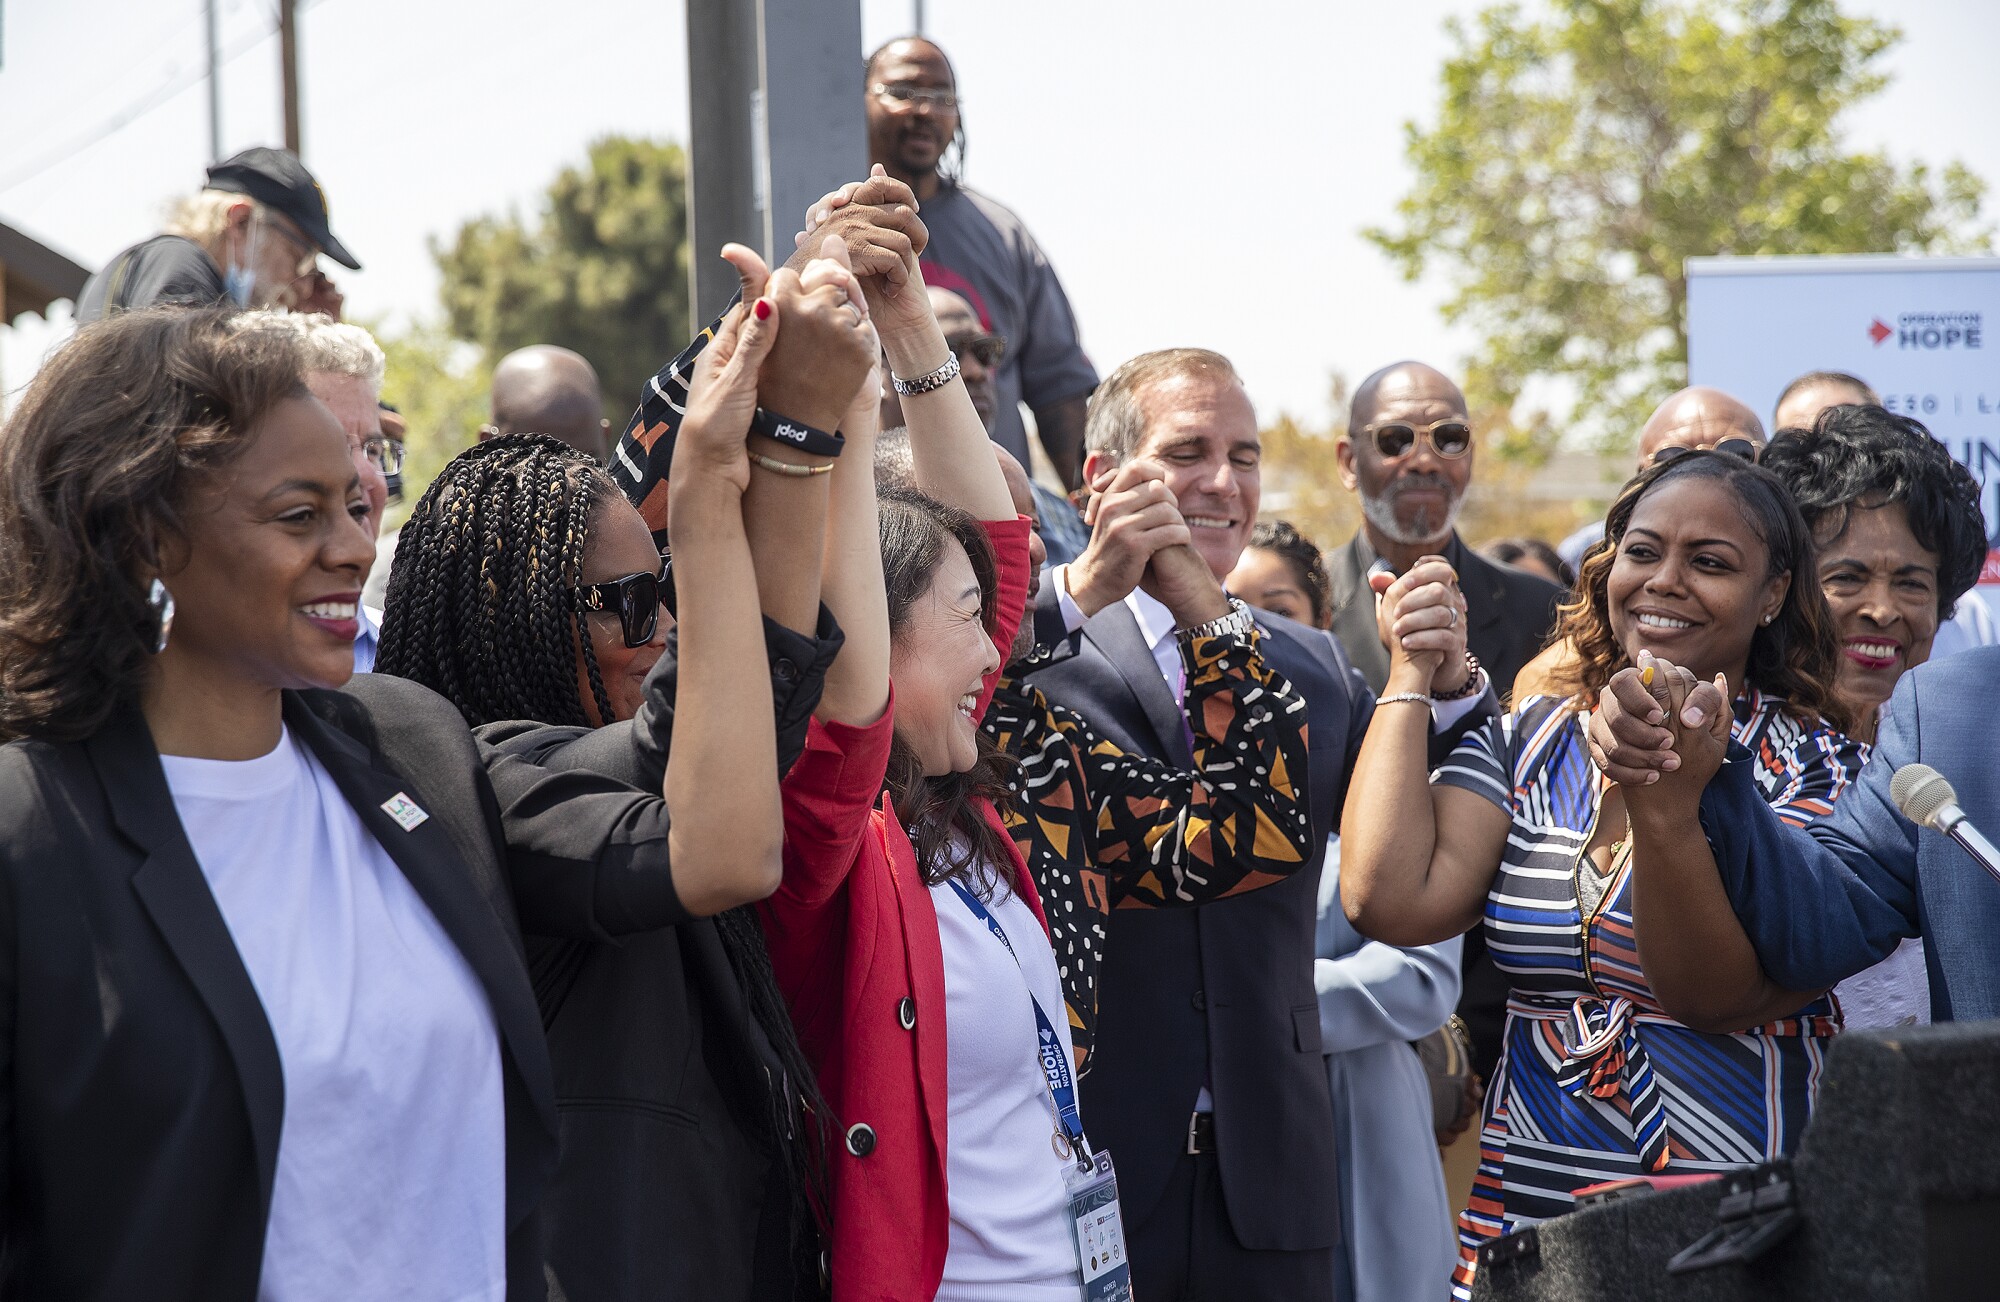 The mayor of Los Angeles raises hands with a group gathered at a news conference.